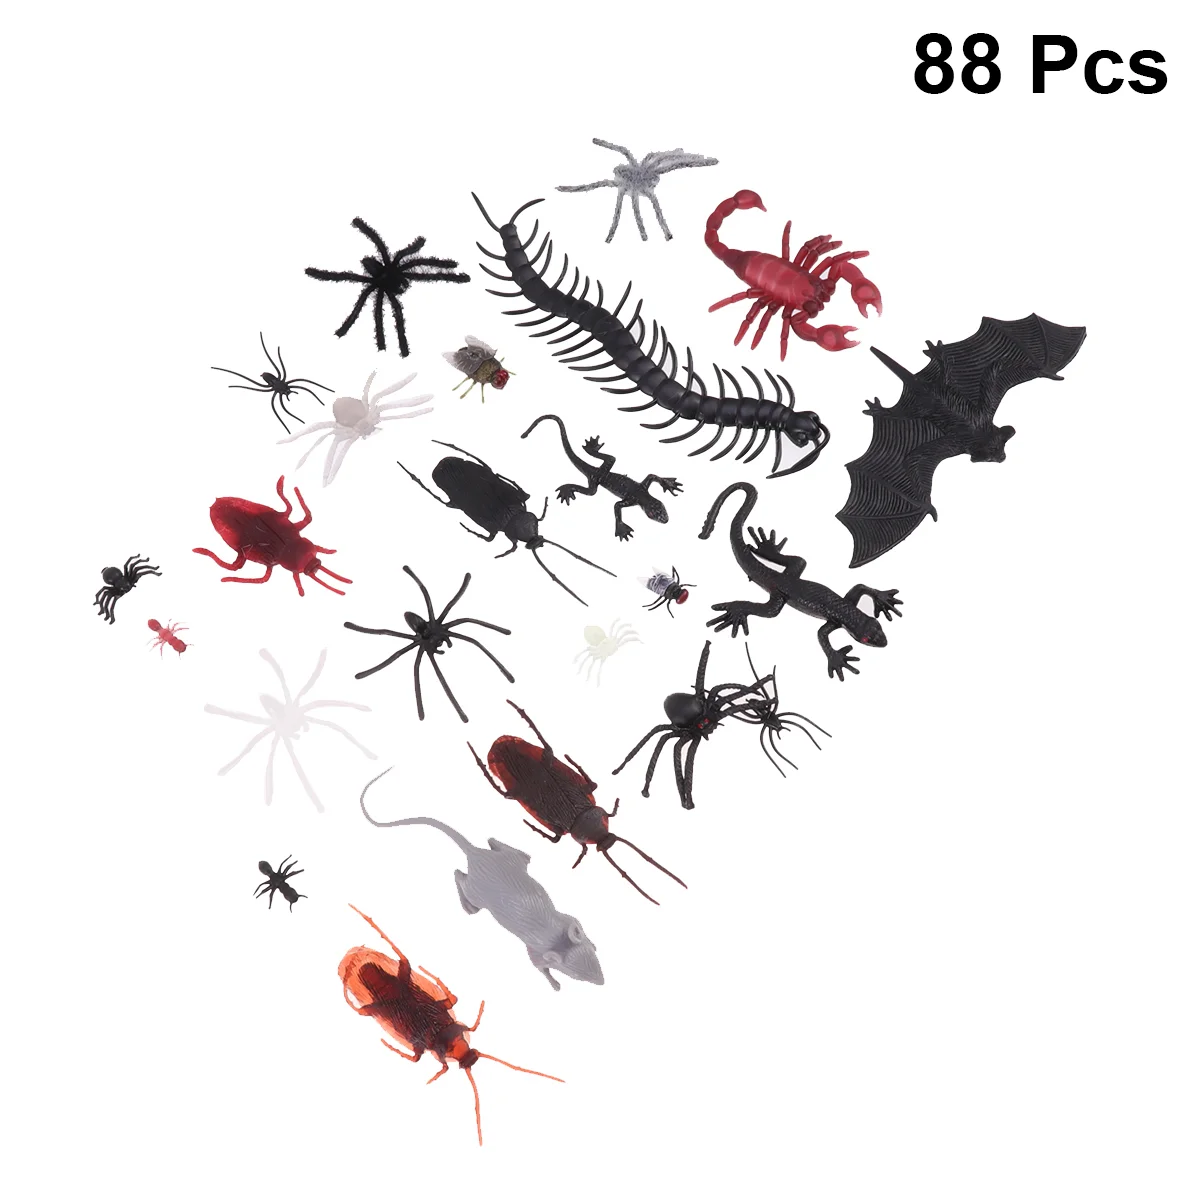 

88 PCS Stuffed Toy Artificial Prop April Fools Day Tricky Props Halloween Toys Fake Insect